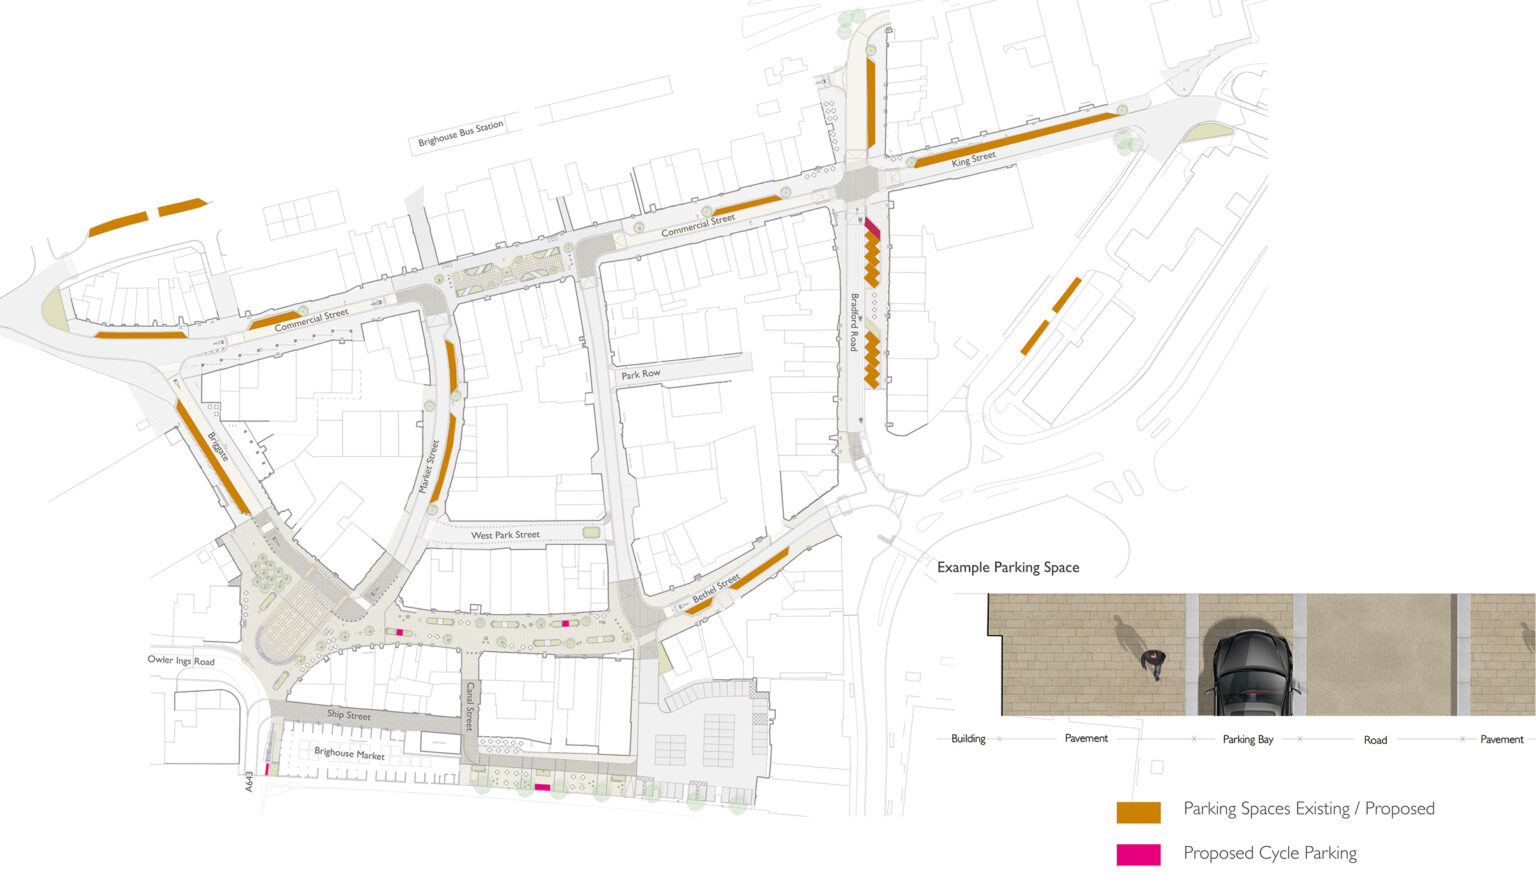 Map view of Brighouse shows parking locations on Commercial Street, King Street, Briggate, Market Street, Bethel Street and Bradford Road. Cycle parking will be available on Bradford Road, Canal Street, Bethel Street and next to the Brighouse Open Market.